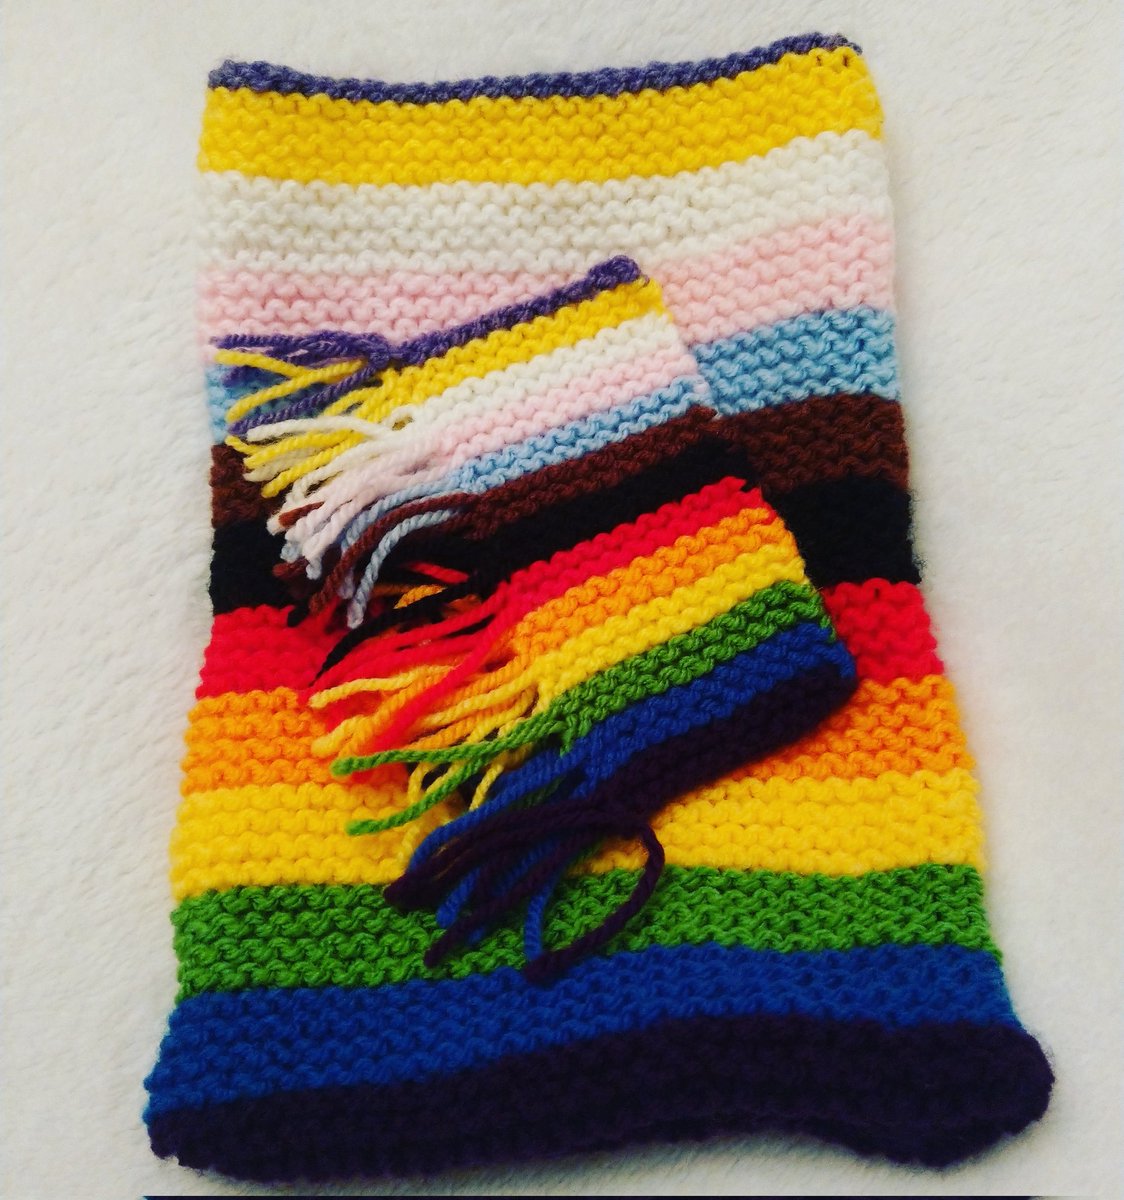 11th #booksleeve & #bookmark is the #gayflag #intersexinclusiveprideflag 

All flags live this Friday 31st March! 

Also get 10% off your first order & FREE delivery over £25 (sorry, UK only)  

#knitter #wool #handmade #lgbt #lgbtqiaplus #allinclusiveprideflag
#smallbusinessuk